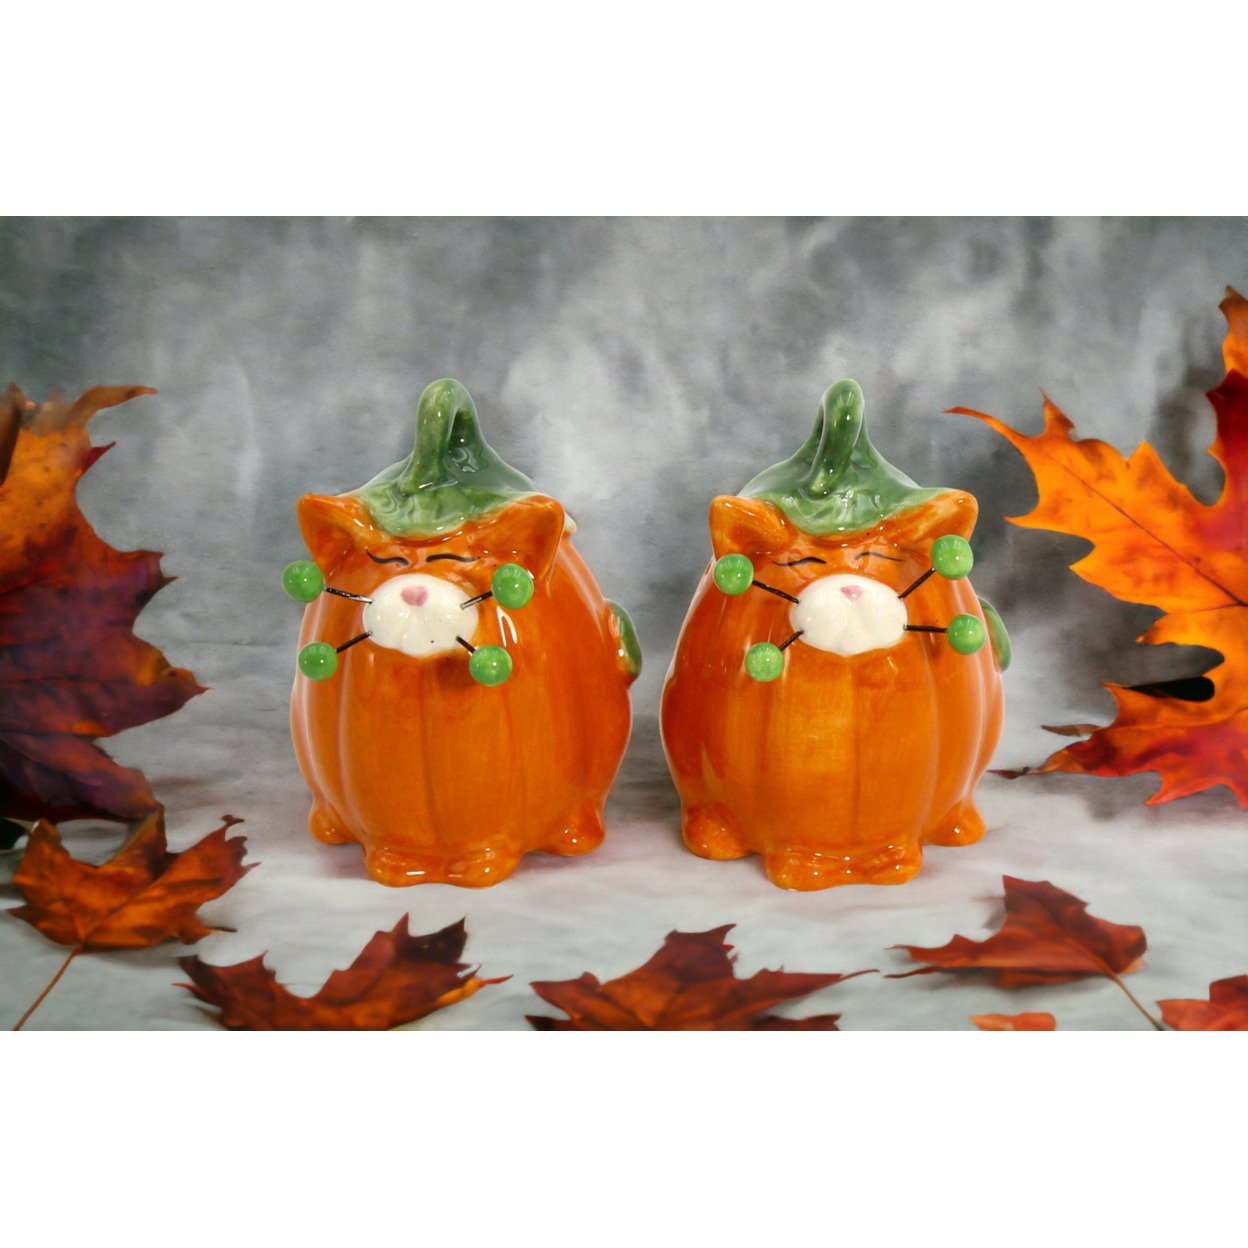 kevinsgiftshoppe Ceramic Pumpkin Cats with Beaded Whiskers Salt and Pepper   Kitchen Decor Fall Decor Halloween Decor